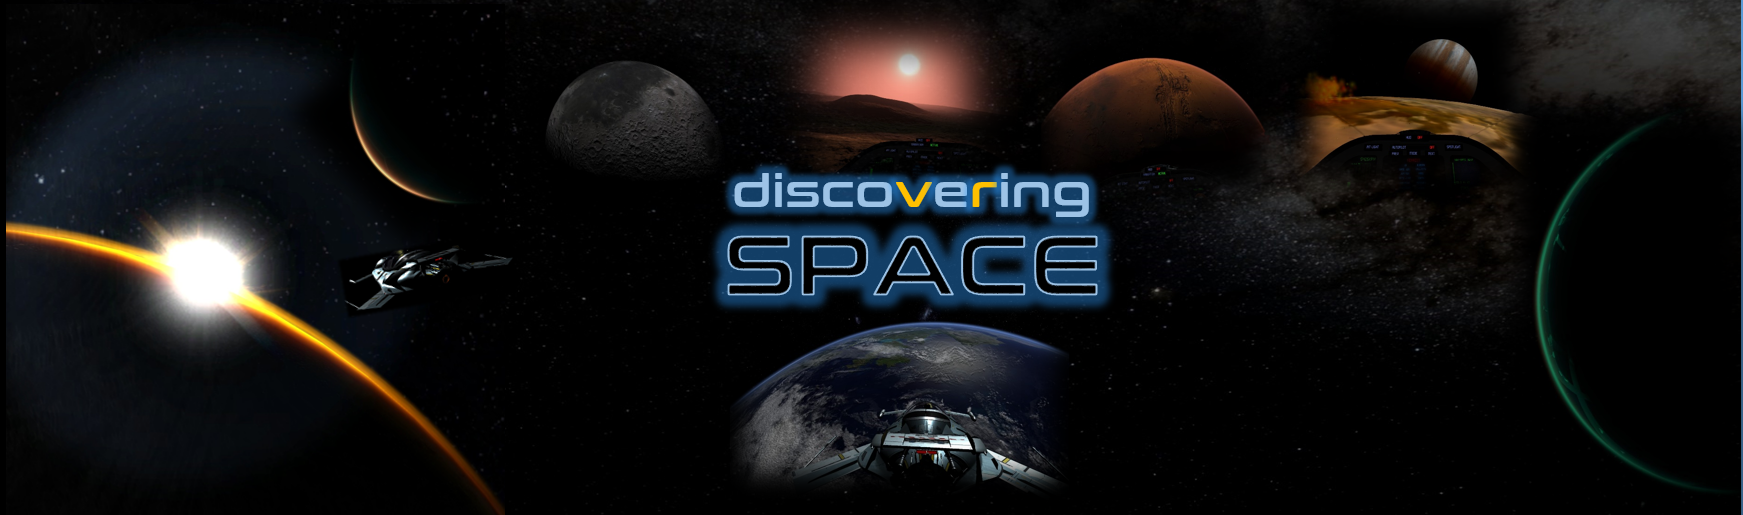 Discovering Space 2 VR